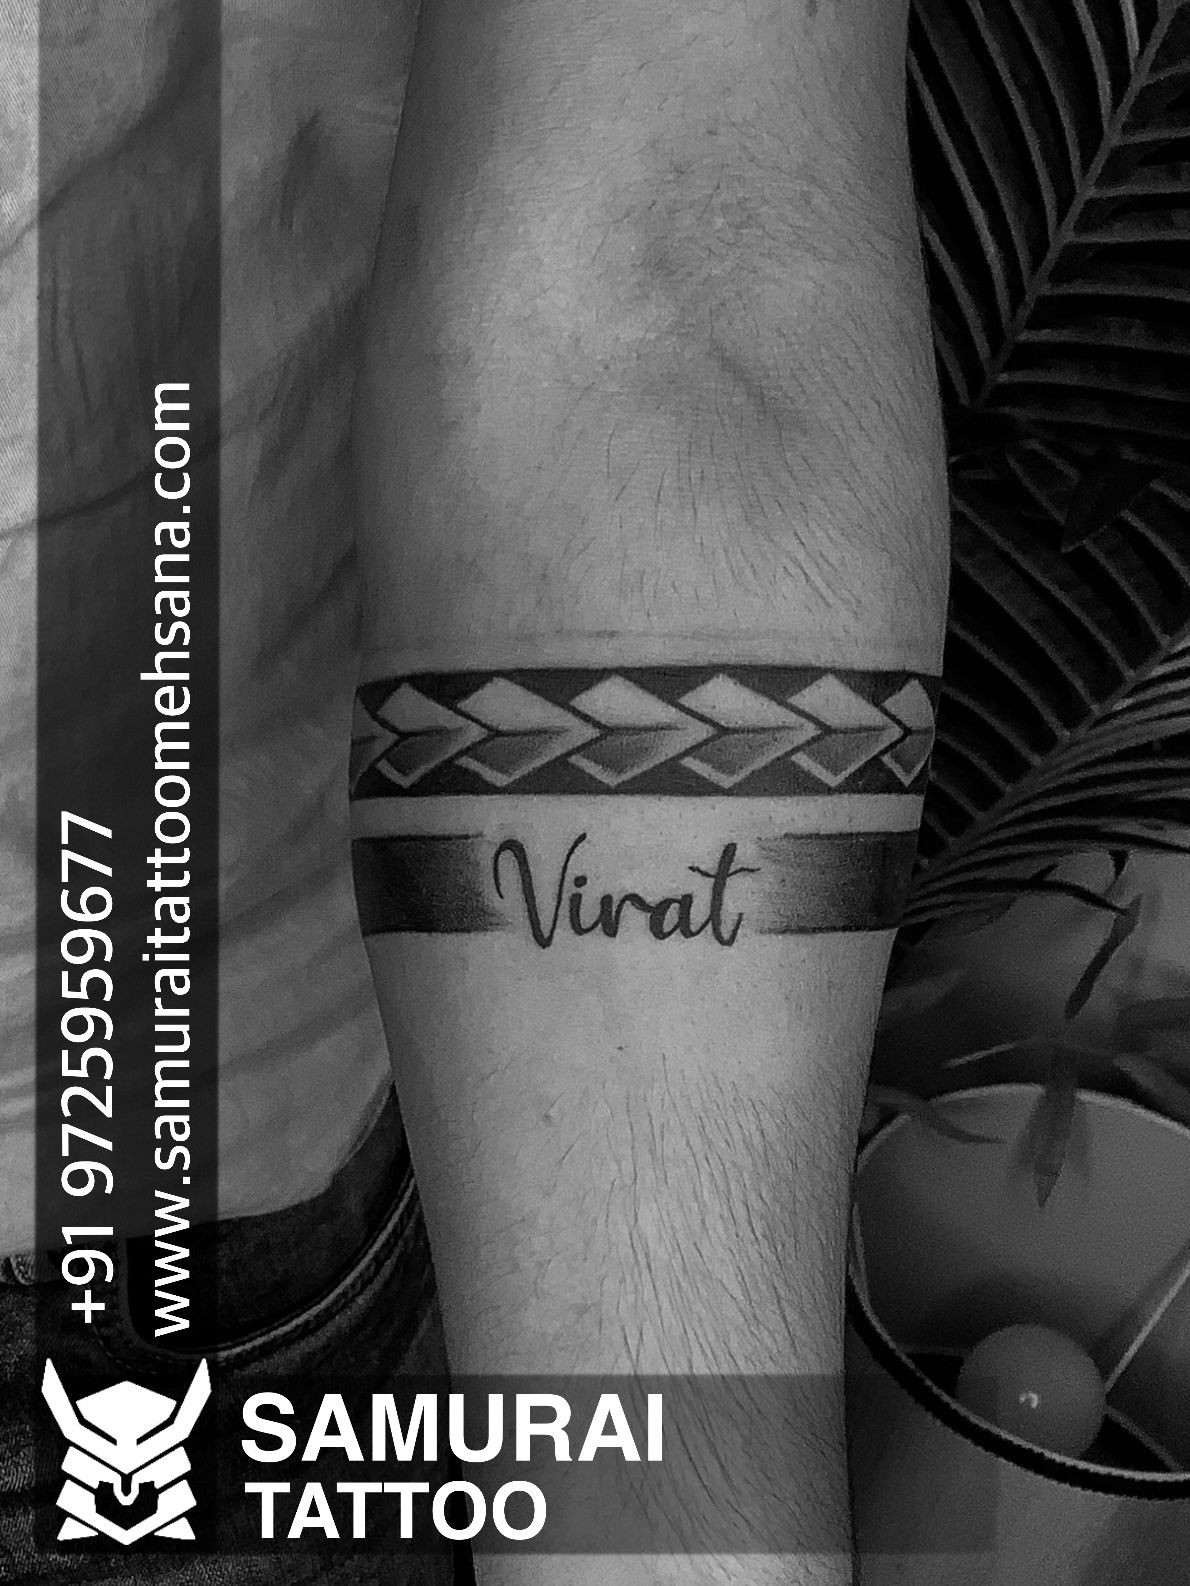 Cool armband tattoo ideas for your next tattoo